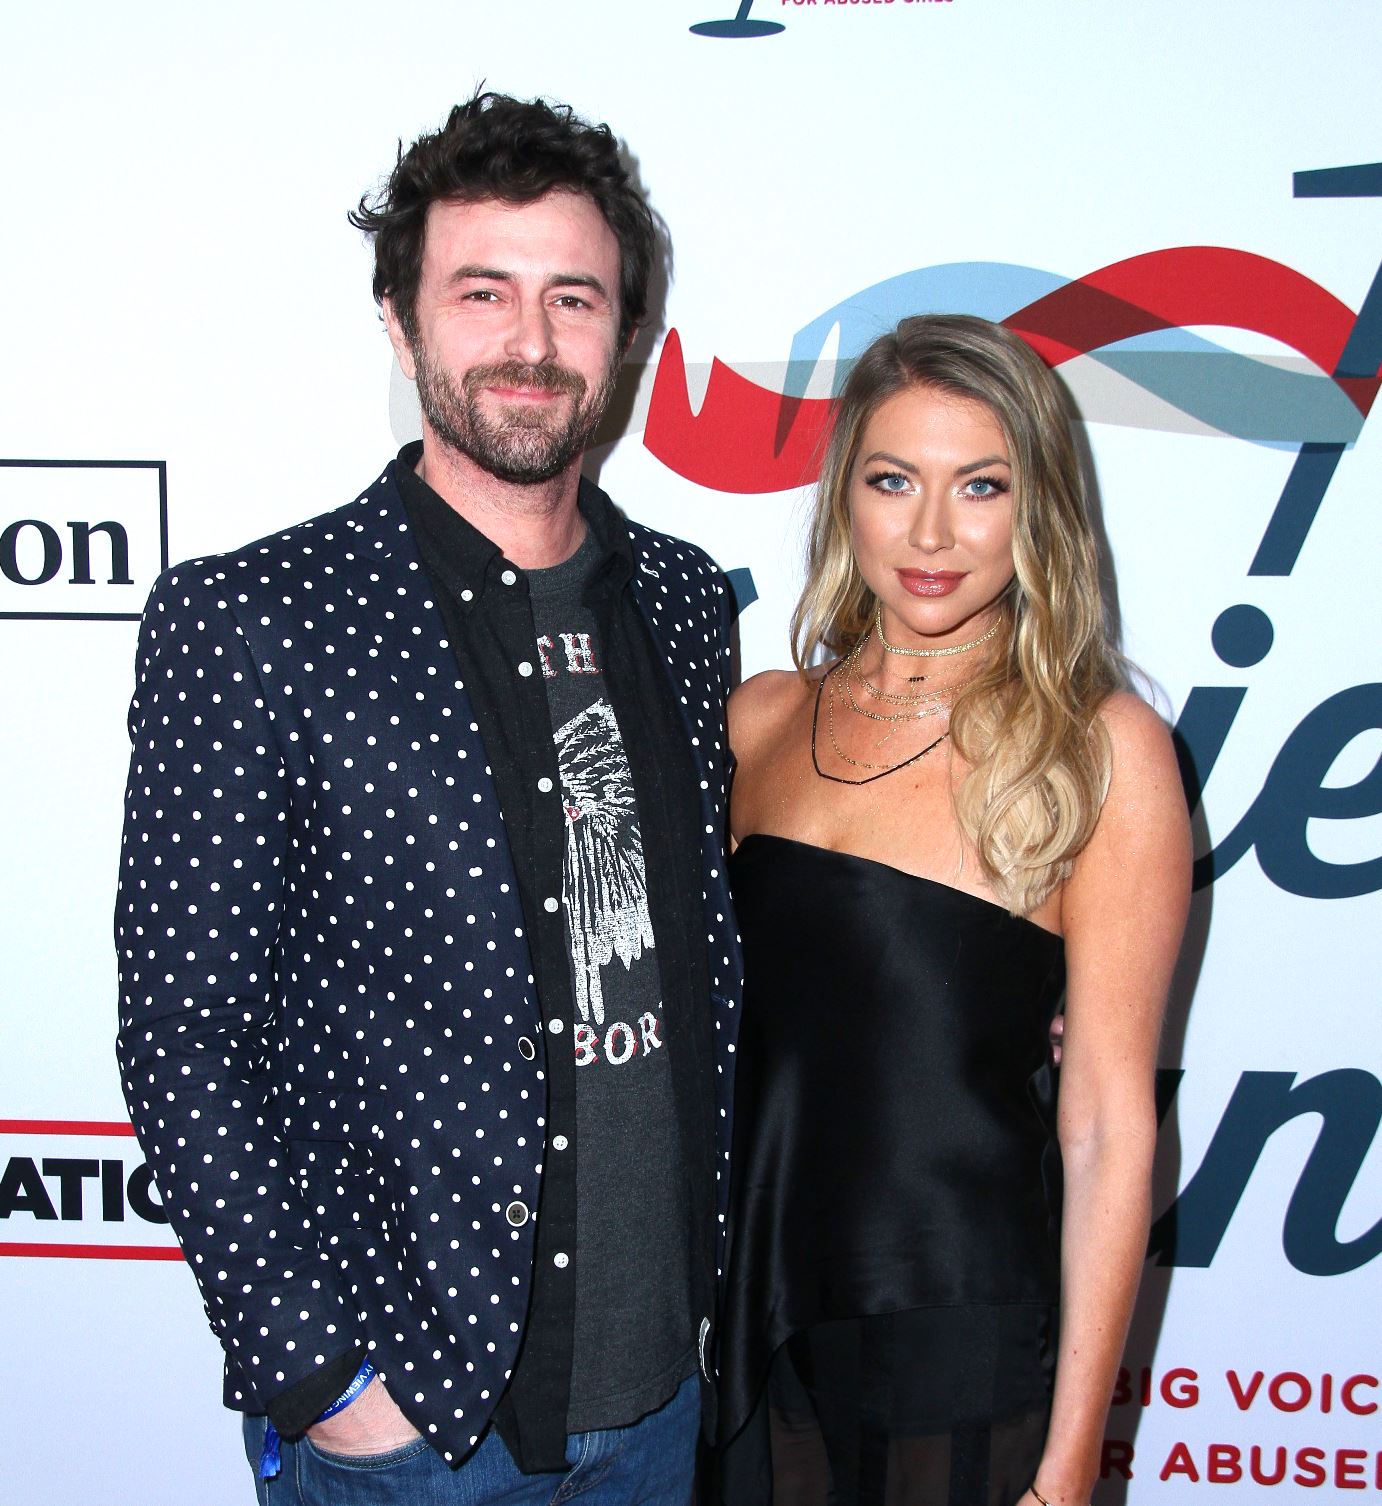 PHOTO: Go Inside the Nursery of Stassi Schroeder's Baby Girl as Ex Vanderpump Rules Star's Fiance Beau Clark Jokes That Her Crib "Looks Like a Prison," Plus See the Latest Pics of Her Baby Bump